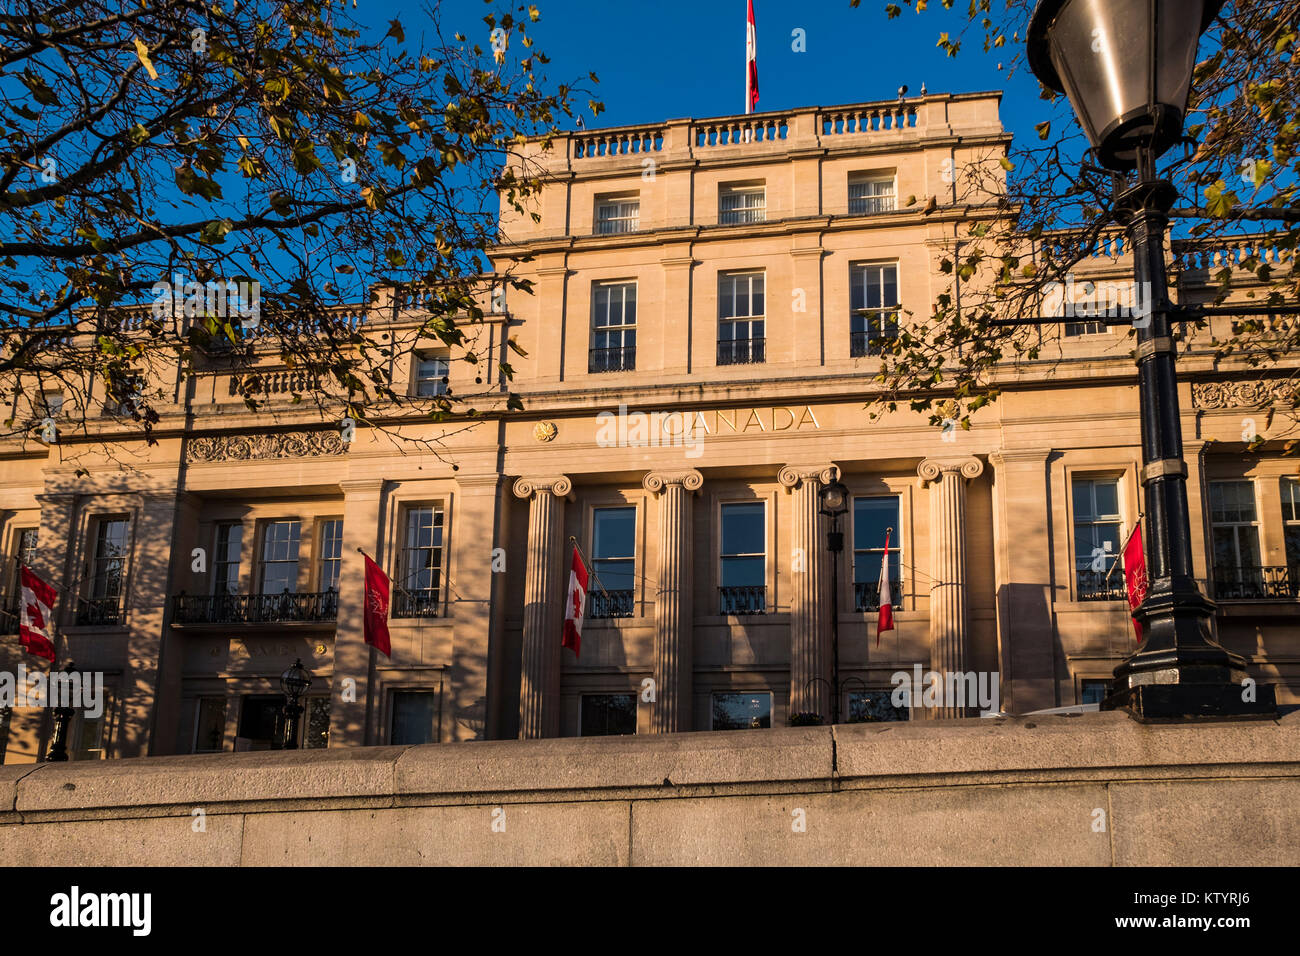 Canada House, offices of the High Commission of Canada, Trafalgar Square, London, England, U.K. Stock Photo